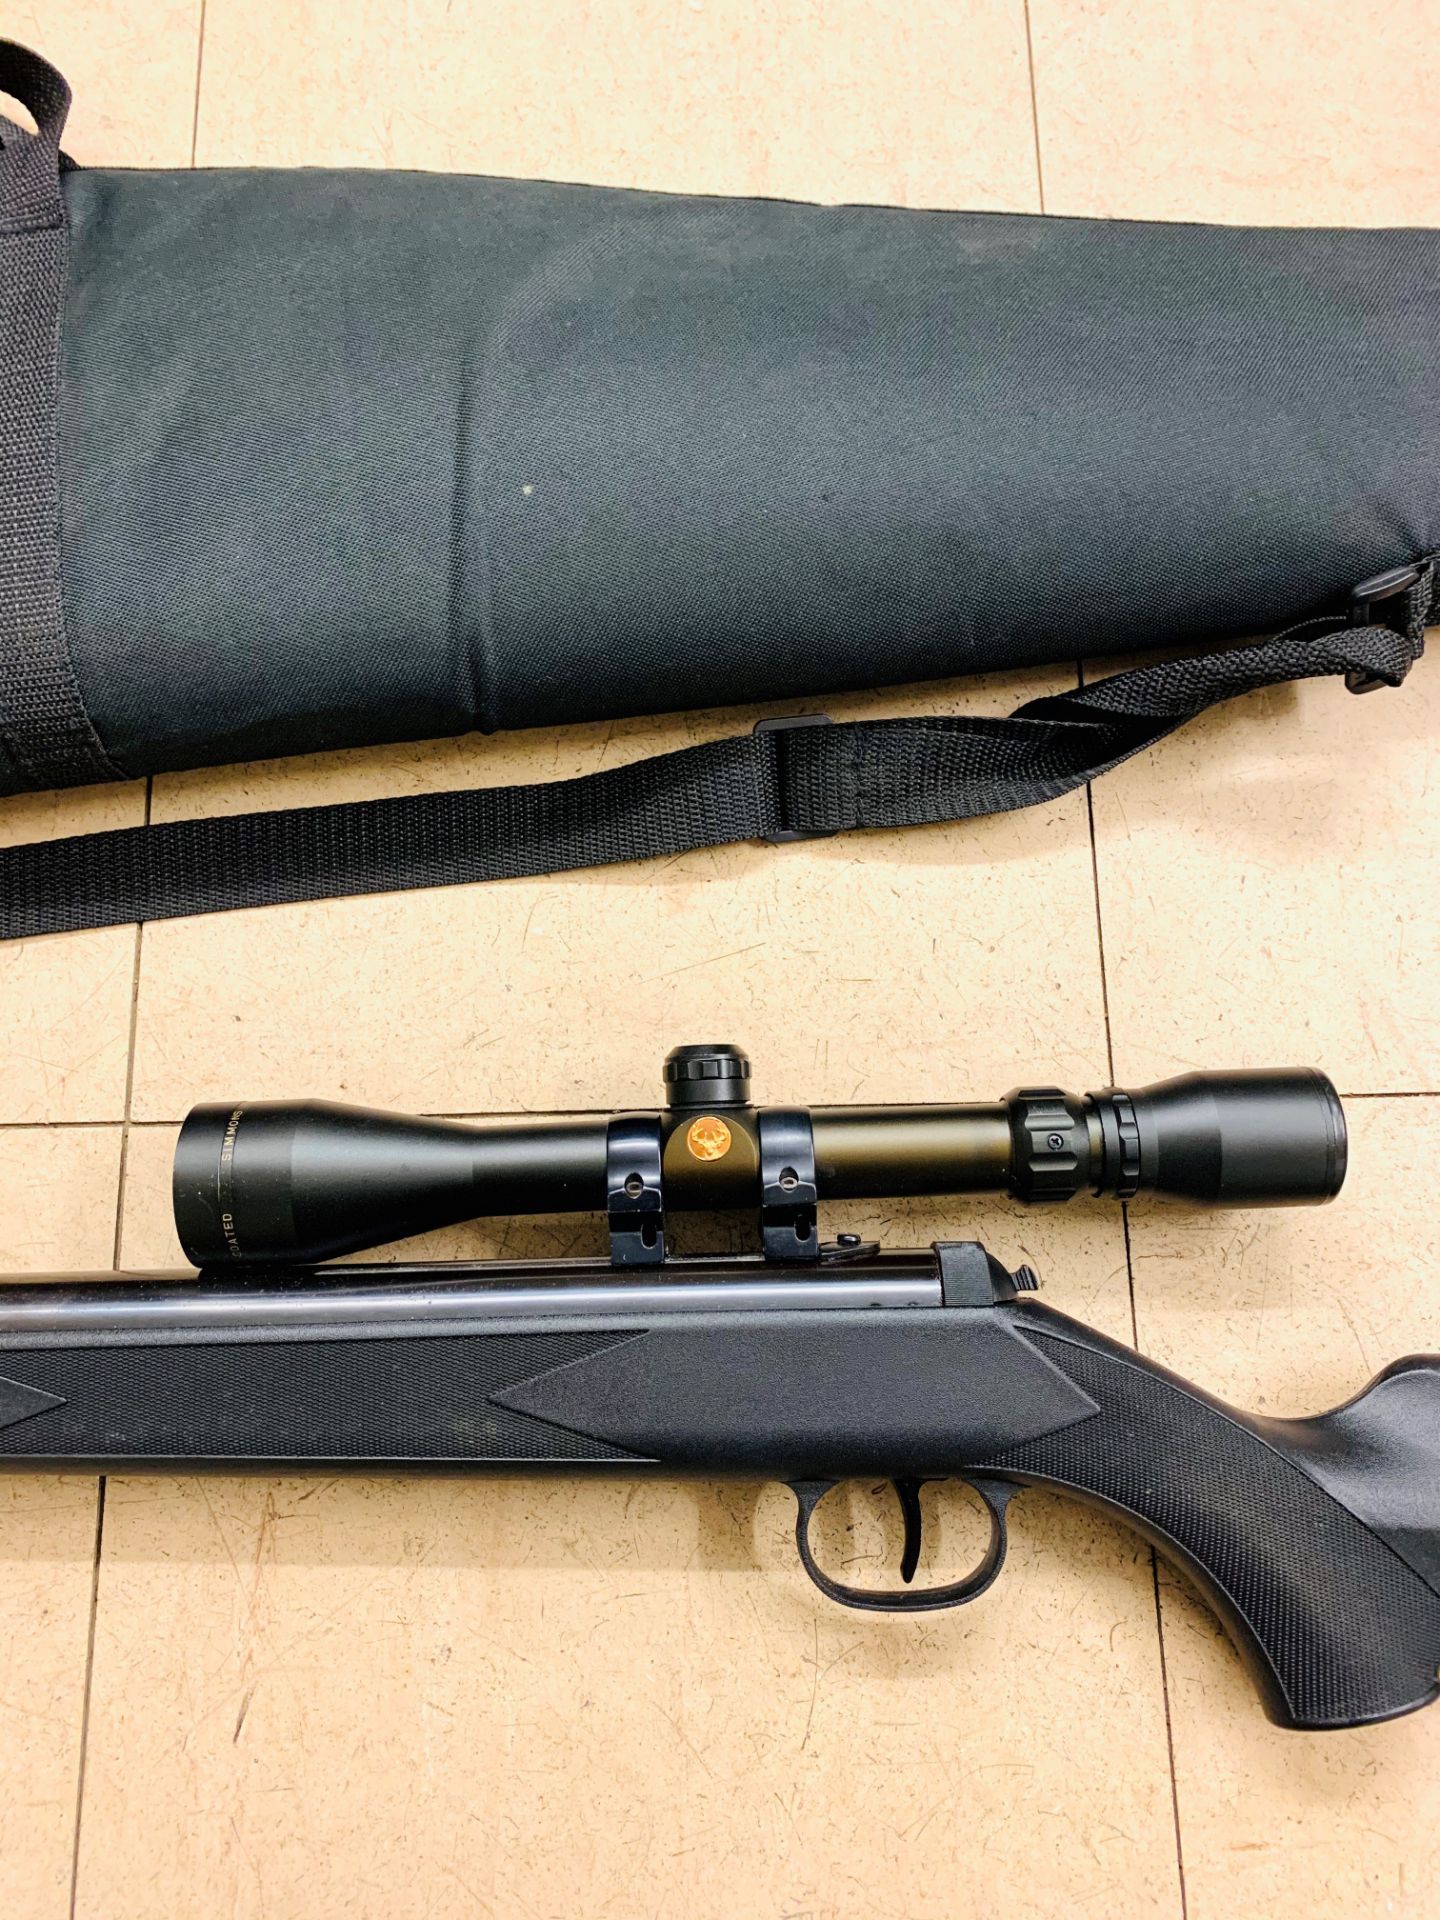 Hammerli Black Force 800 .22 Air Rifle, with scope and suppressor - Image 3 of 5